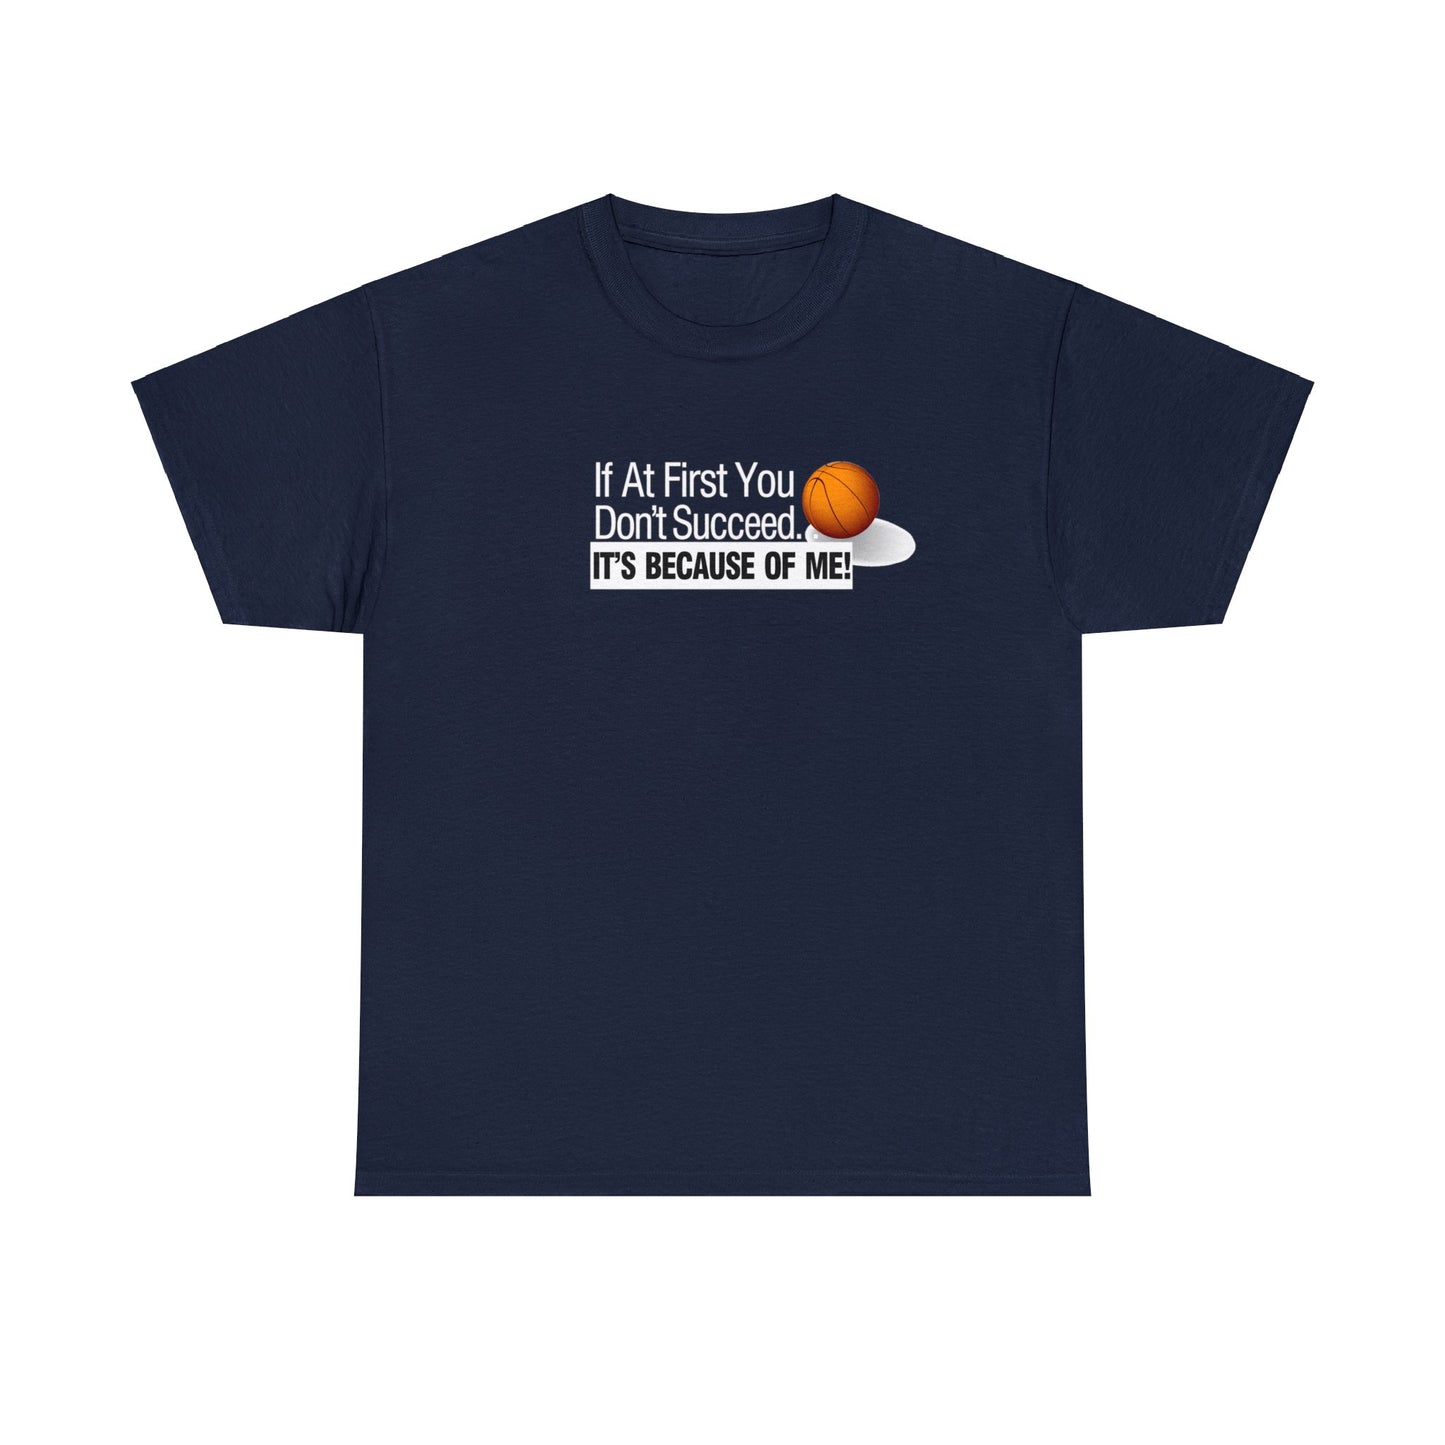 If at First You Don't Succeed, It's Because of Me, Funny Basketball T-Shirt, Basketball Humor, Humorous Hoops Tee, Christmas Gift